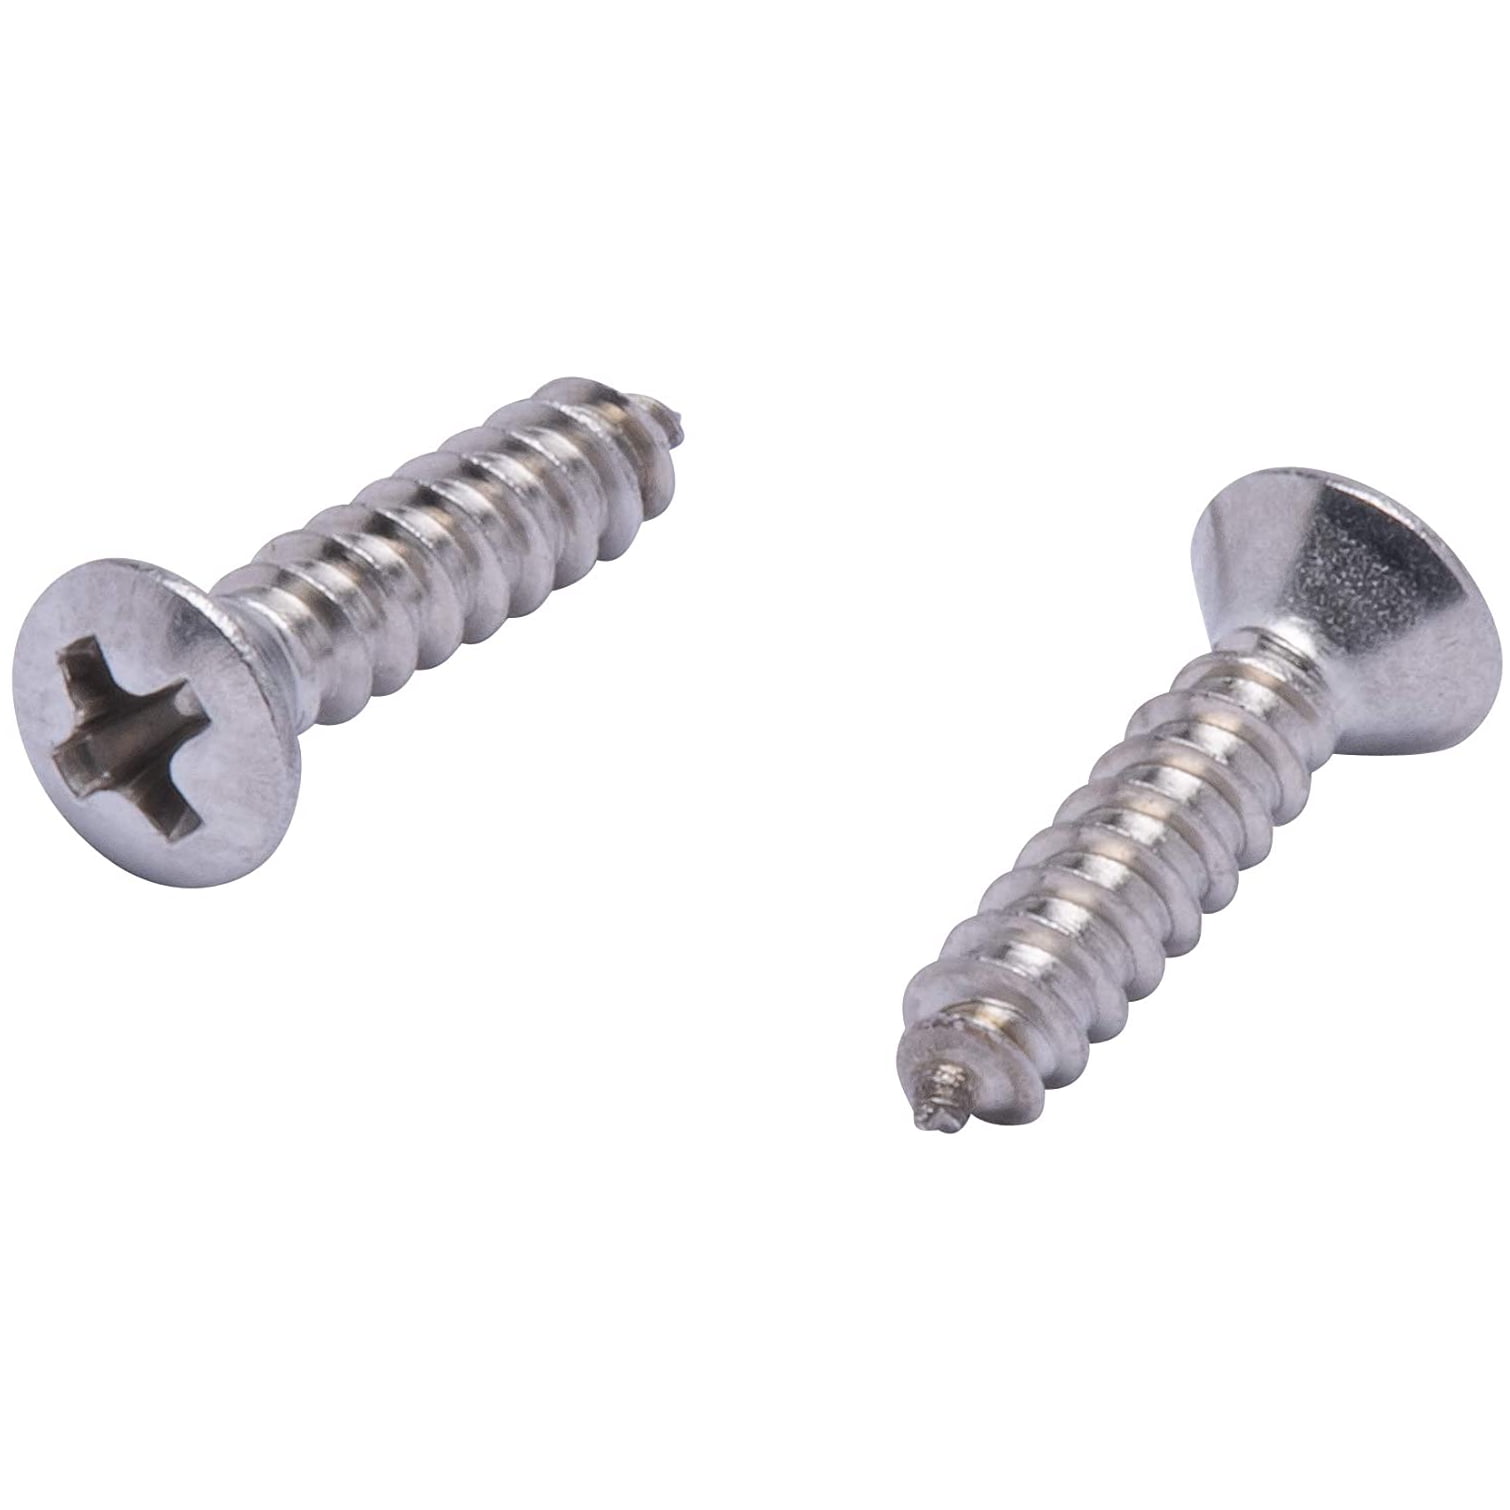 #4 x 1" Oval Head Sheet Metal Screws Stainless Steel Slotted Drive Qty 100 